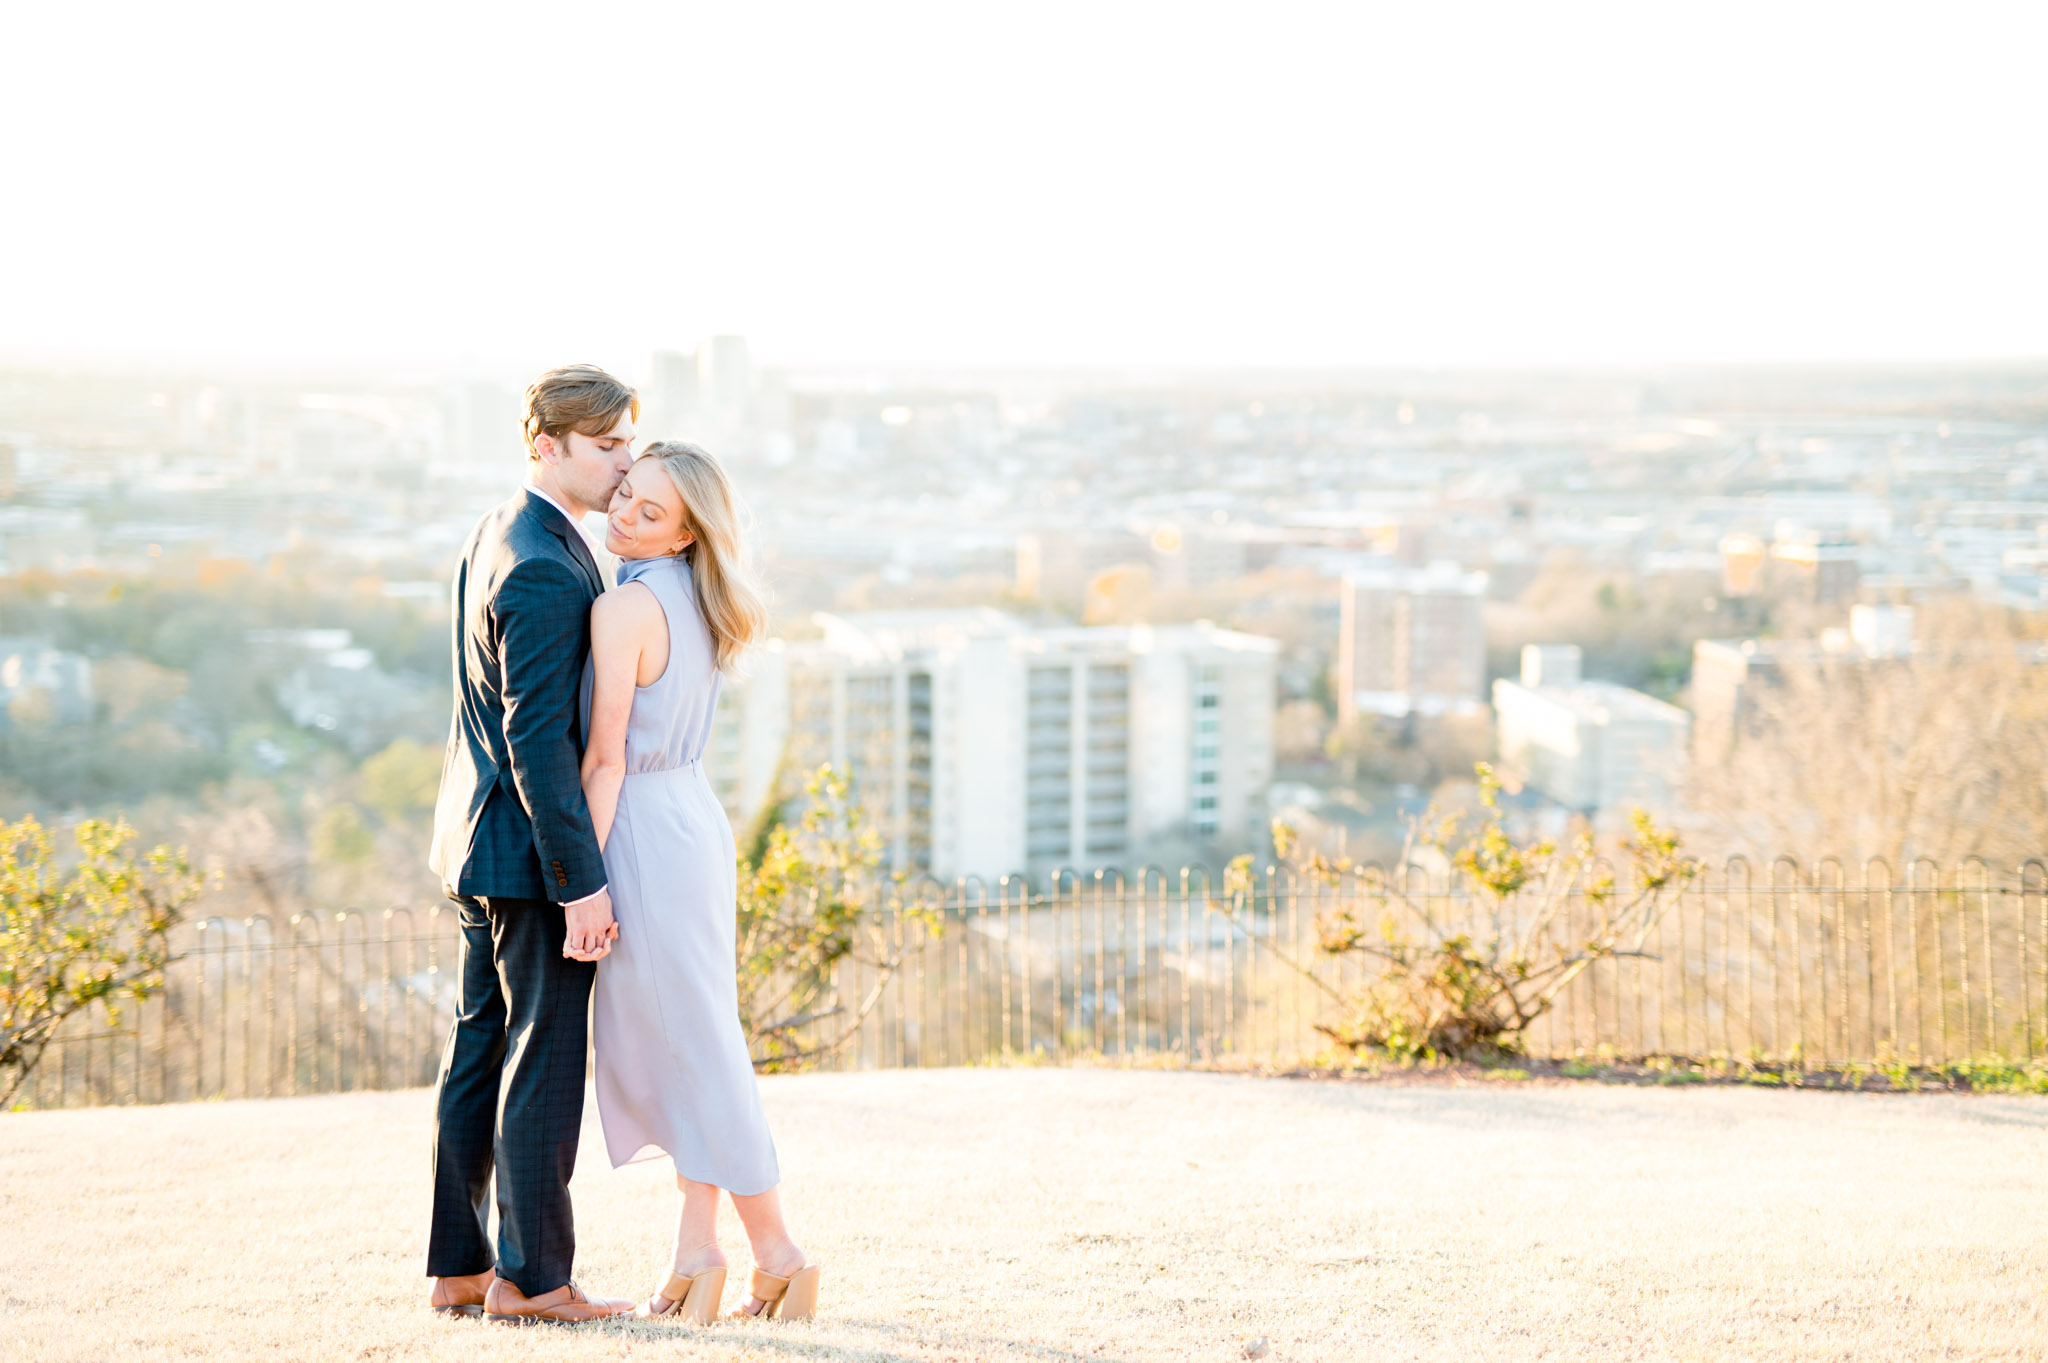 Groom kisses fiance at city overlook.